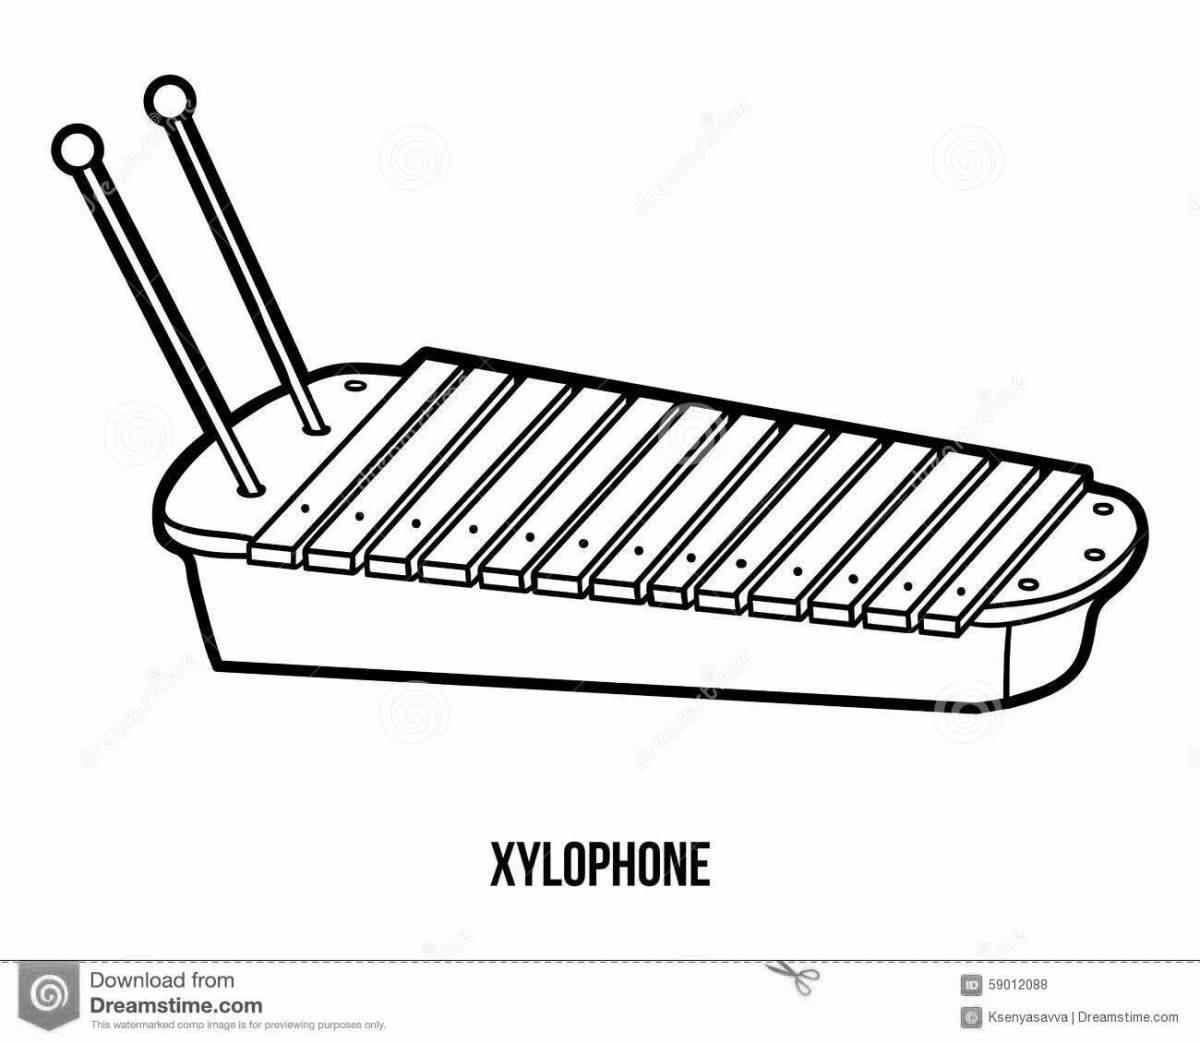 Xylophone fun coloring book for babies